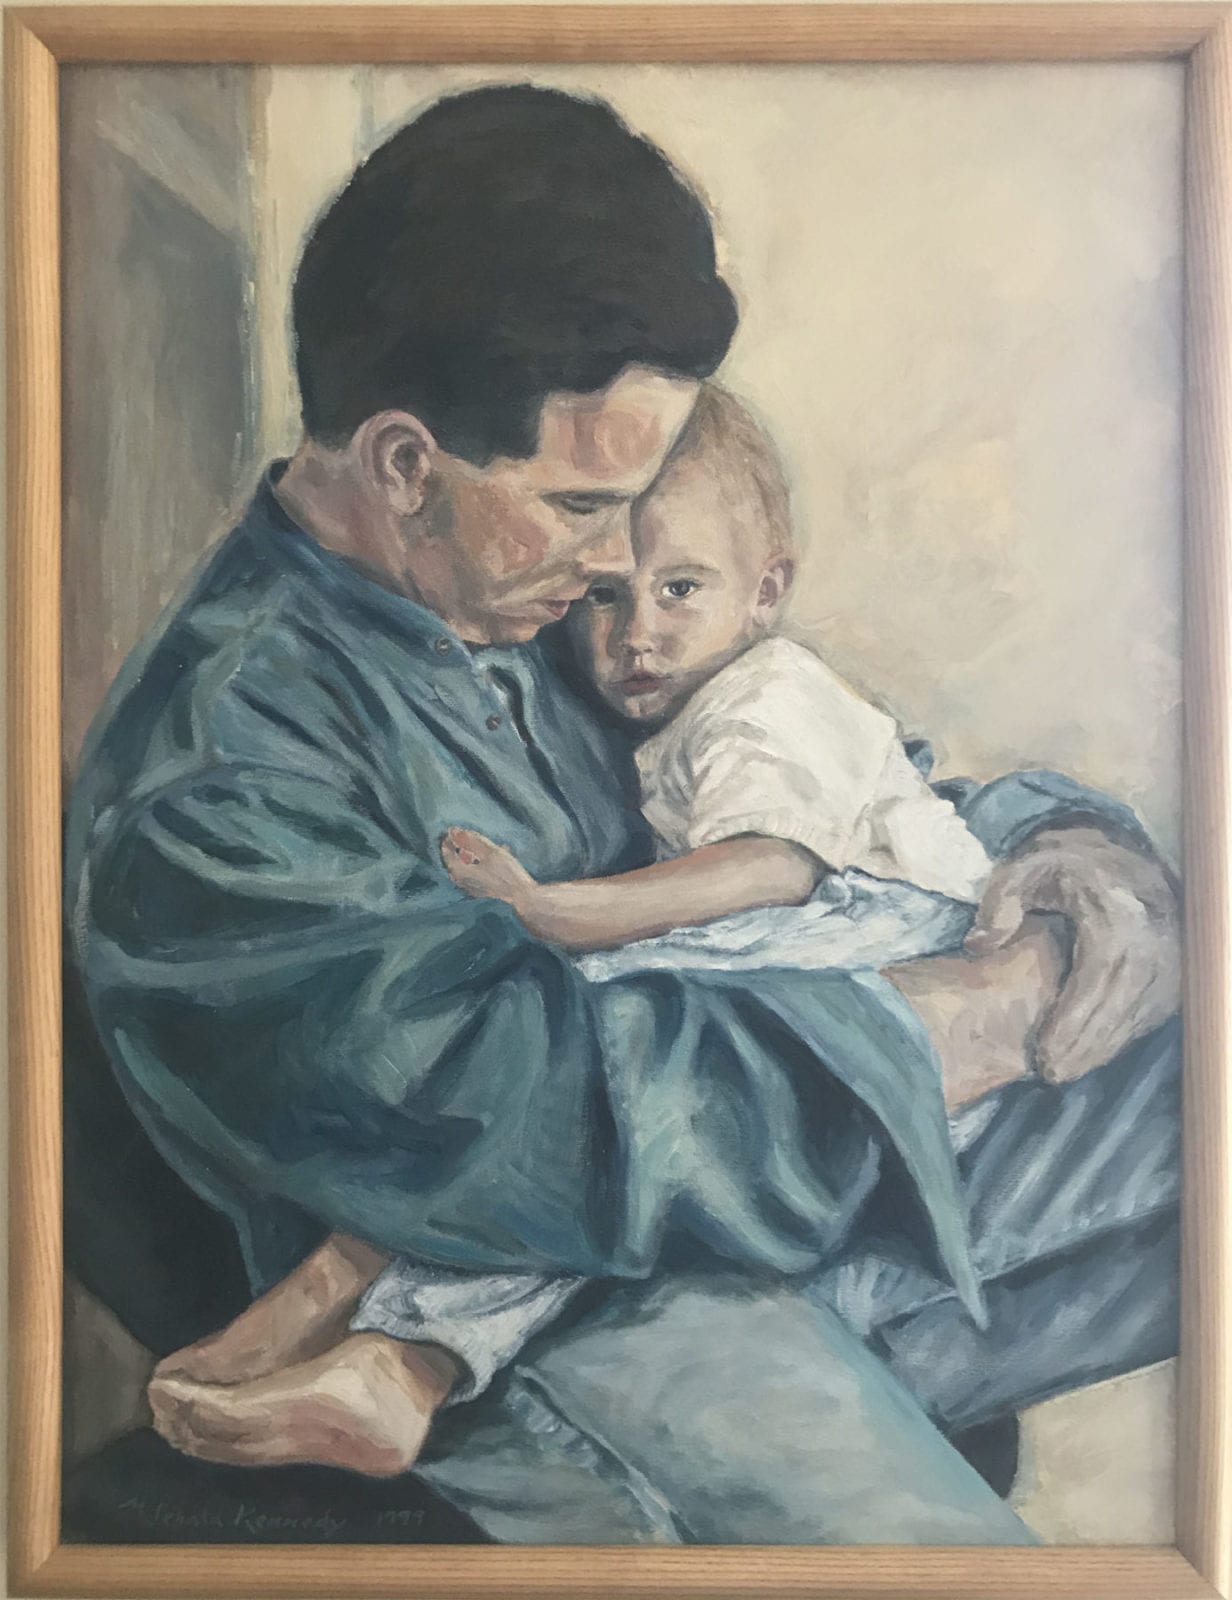 Monica Sebald Kennedy, Father and Son, acrylic painting, 19 x 25